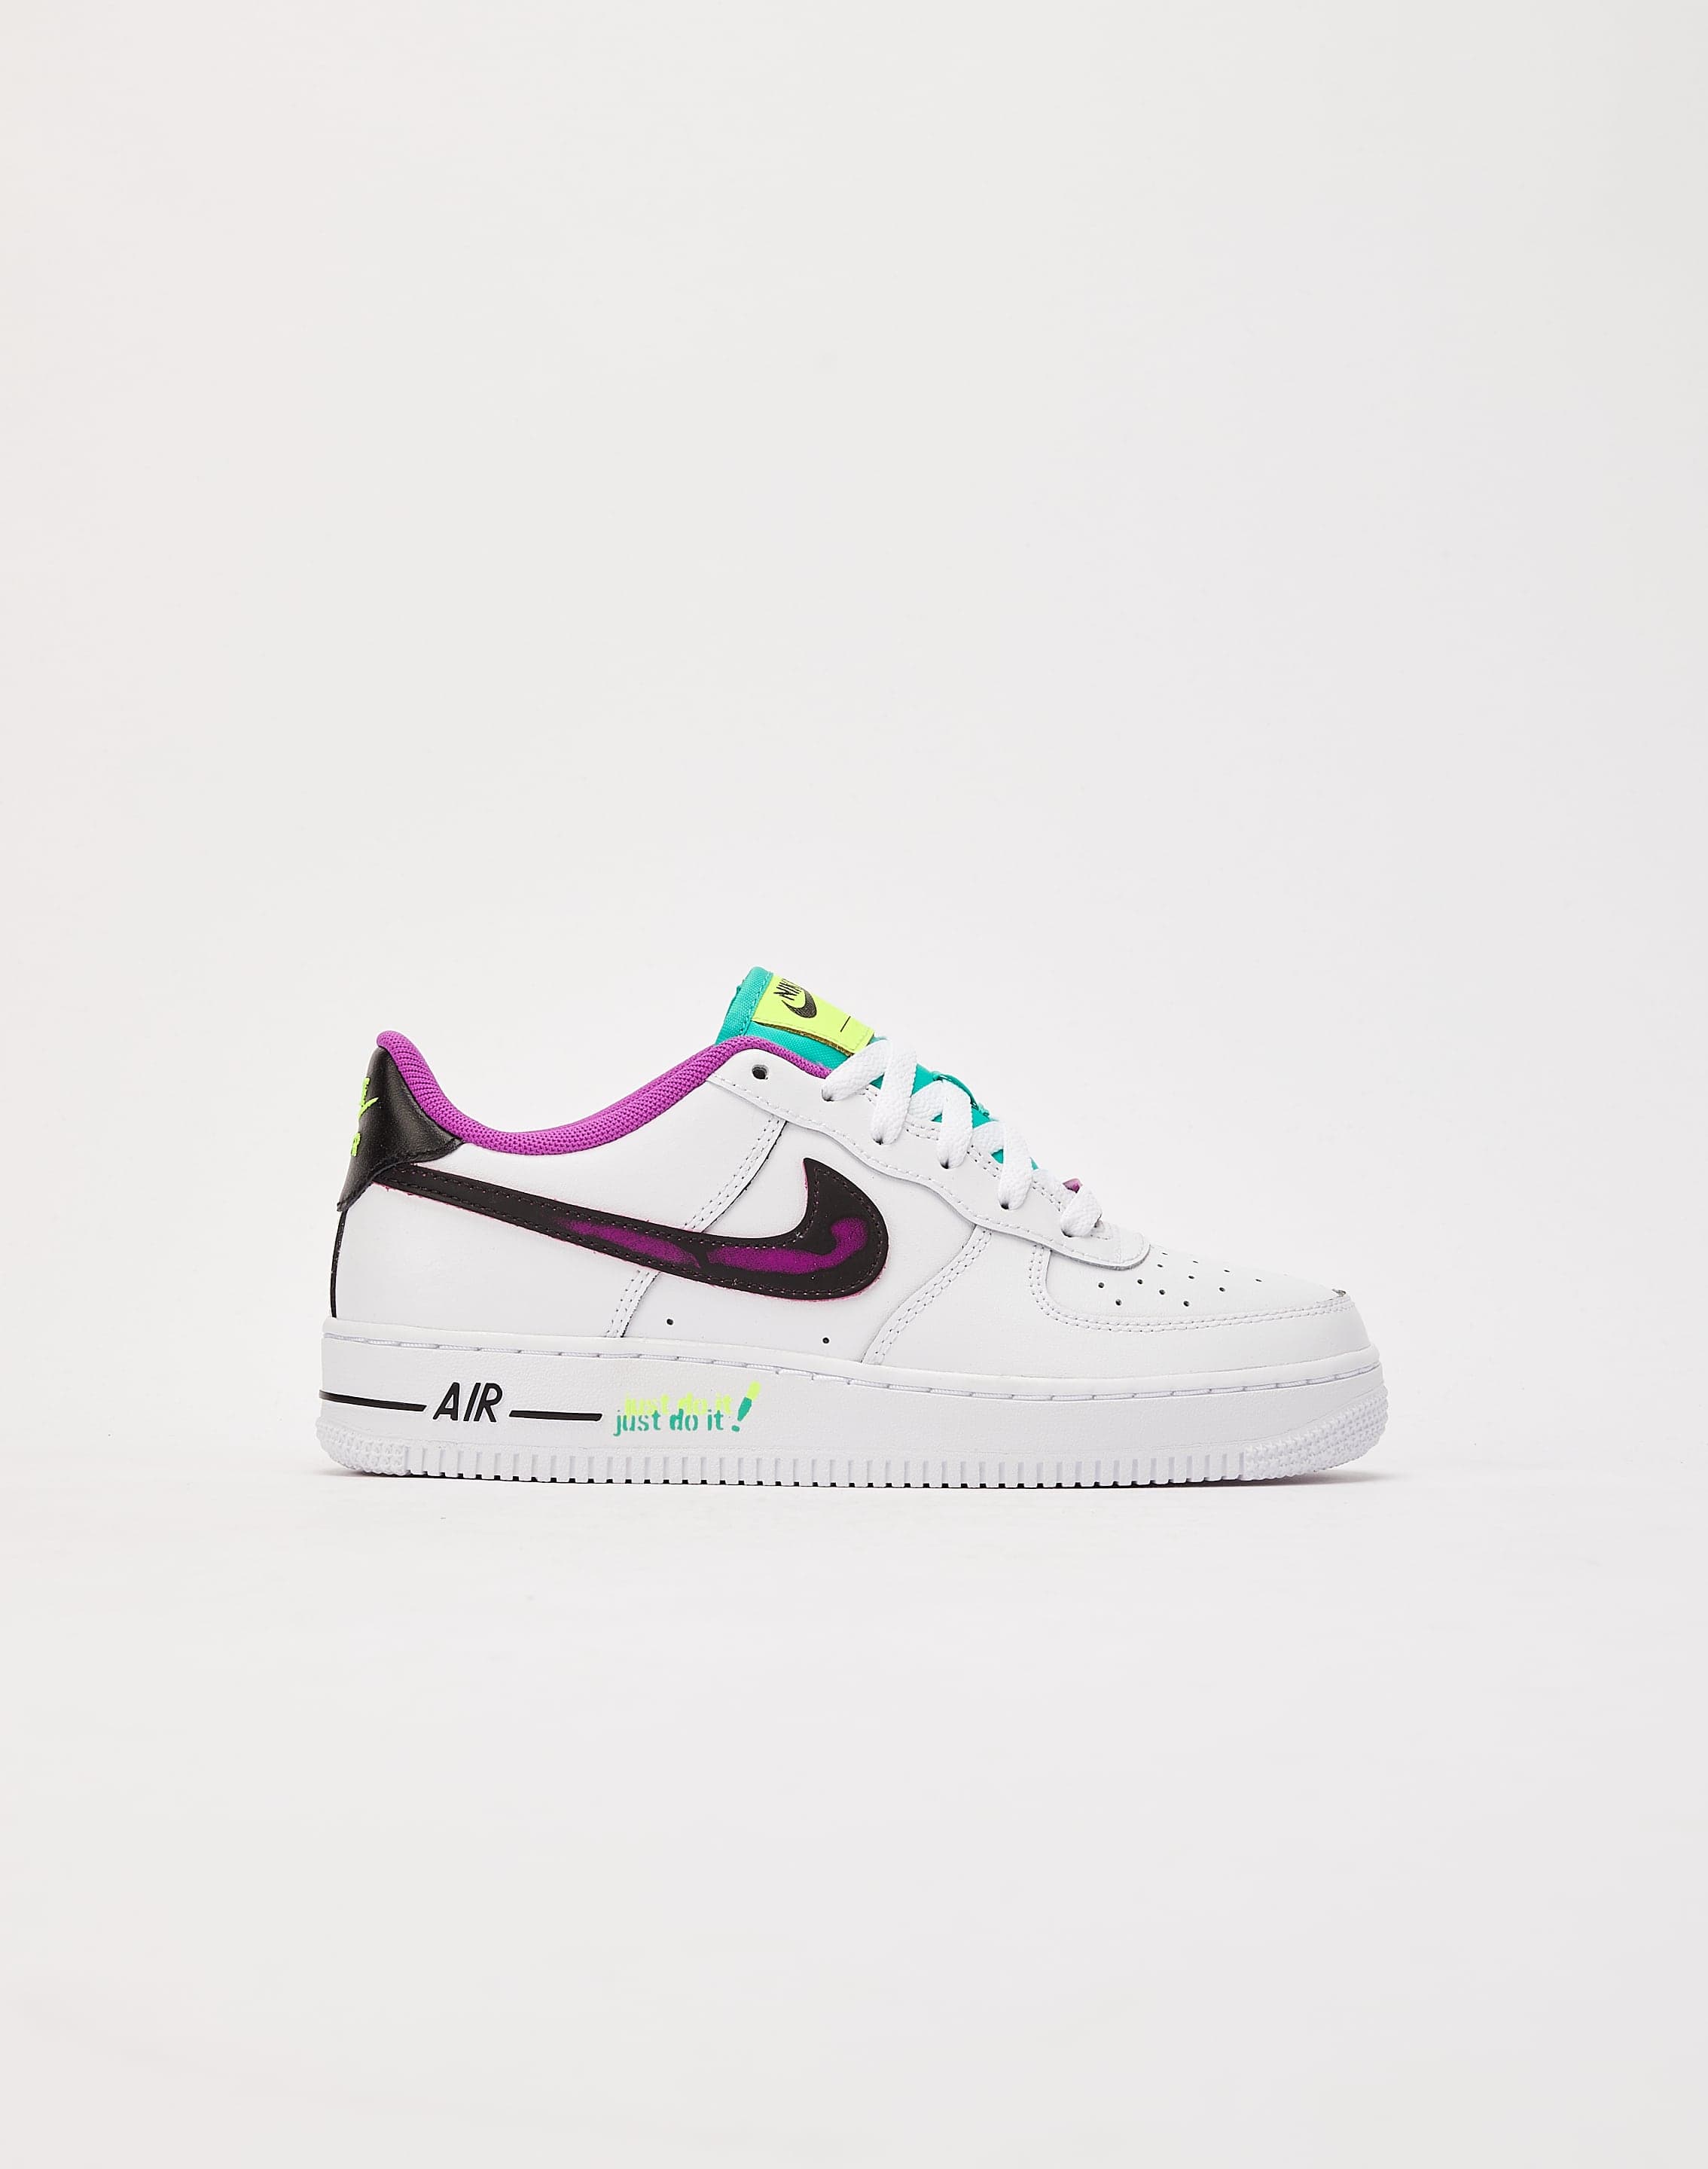 Nike Air Force Low LV8 'Just Do It' Grade-School – DTLR